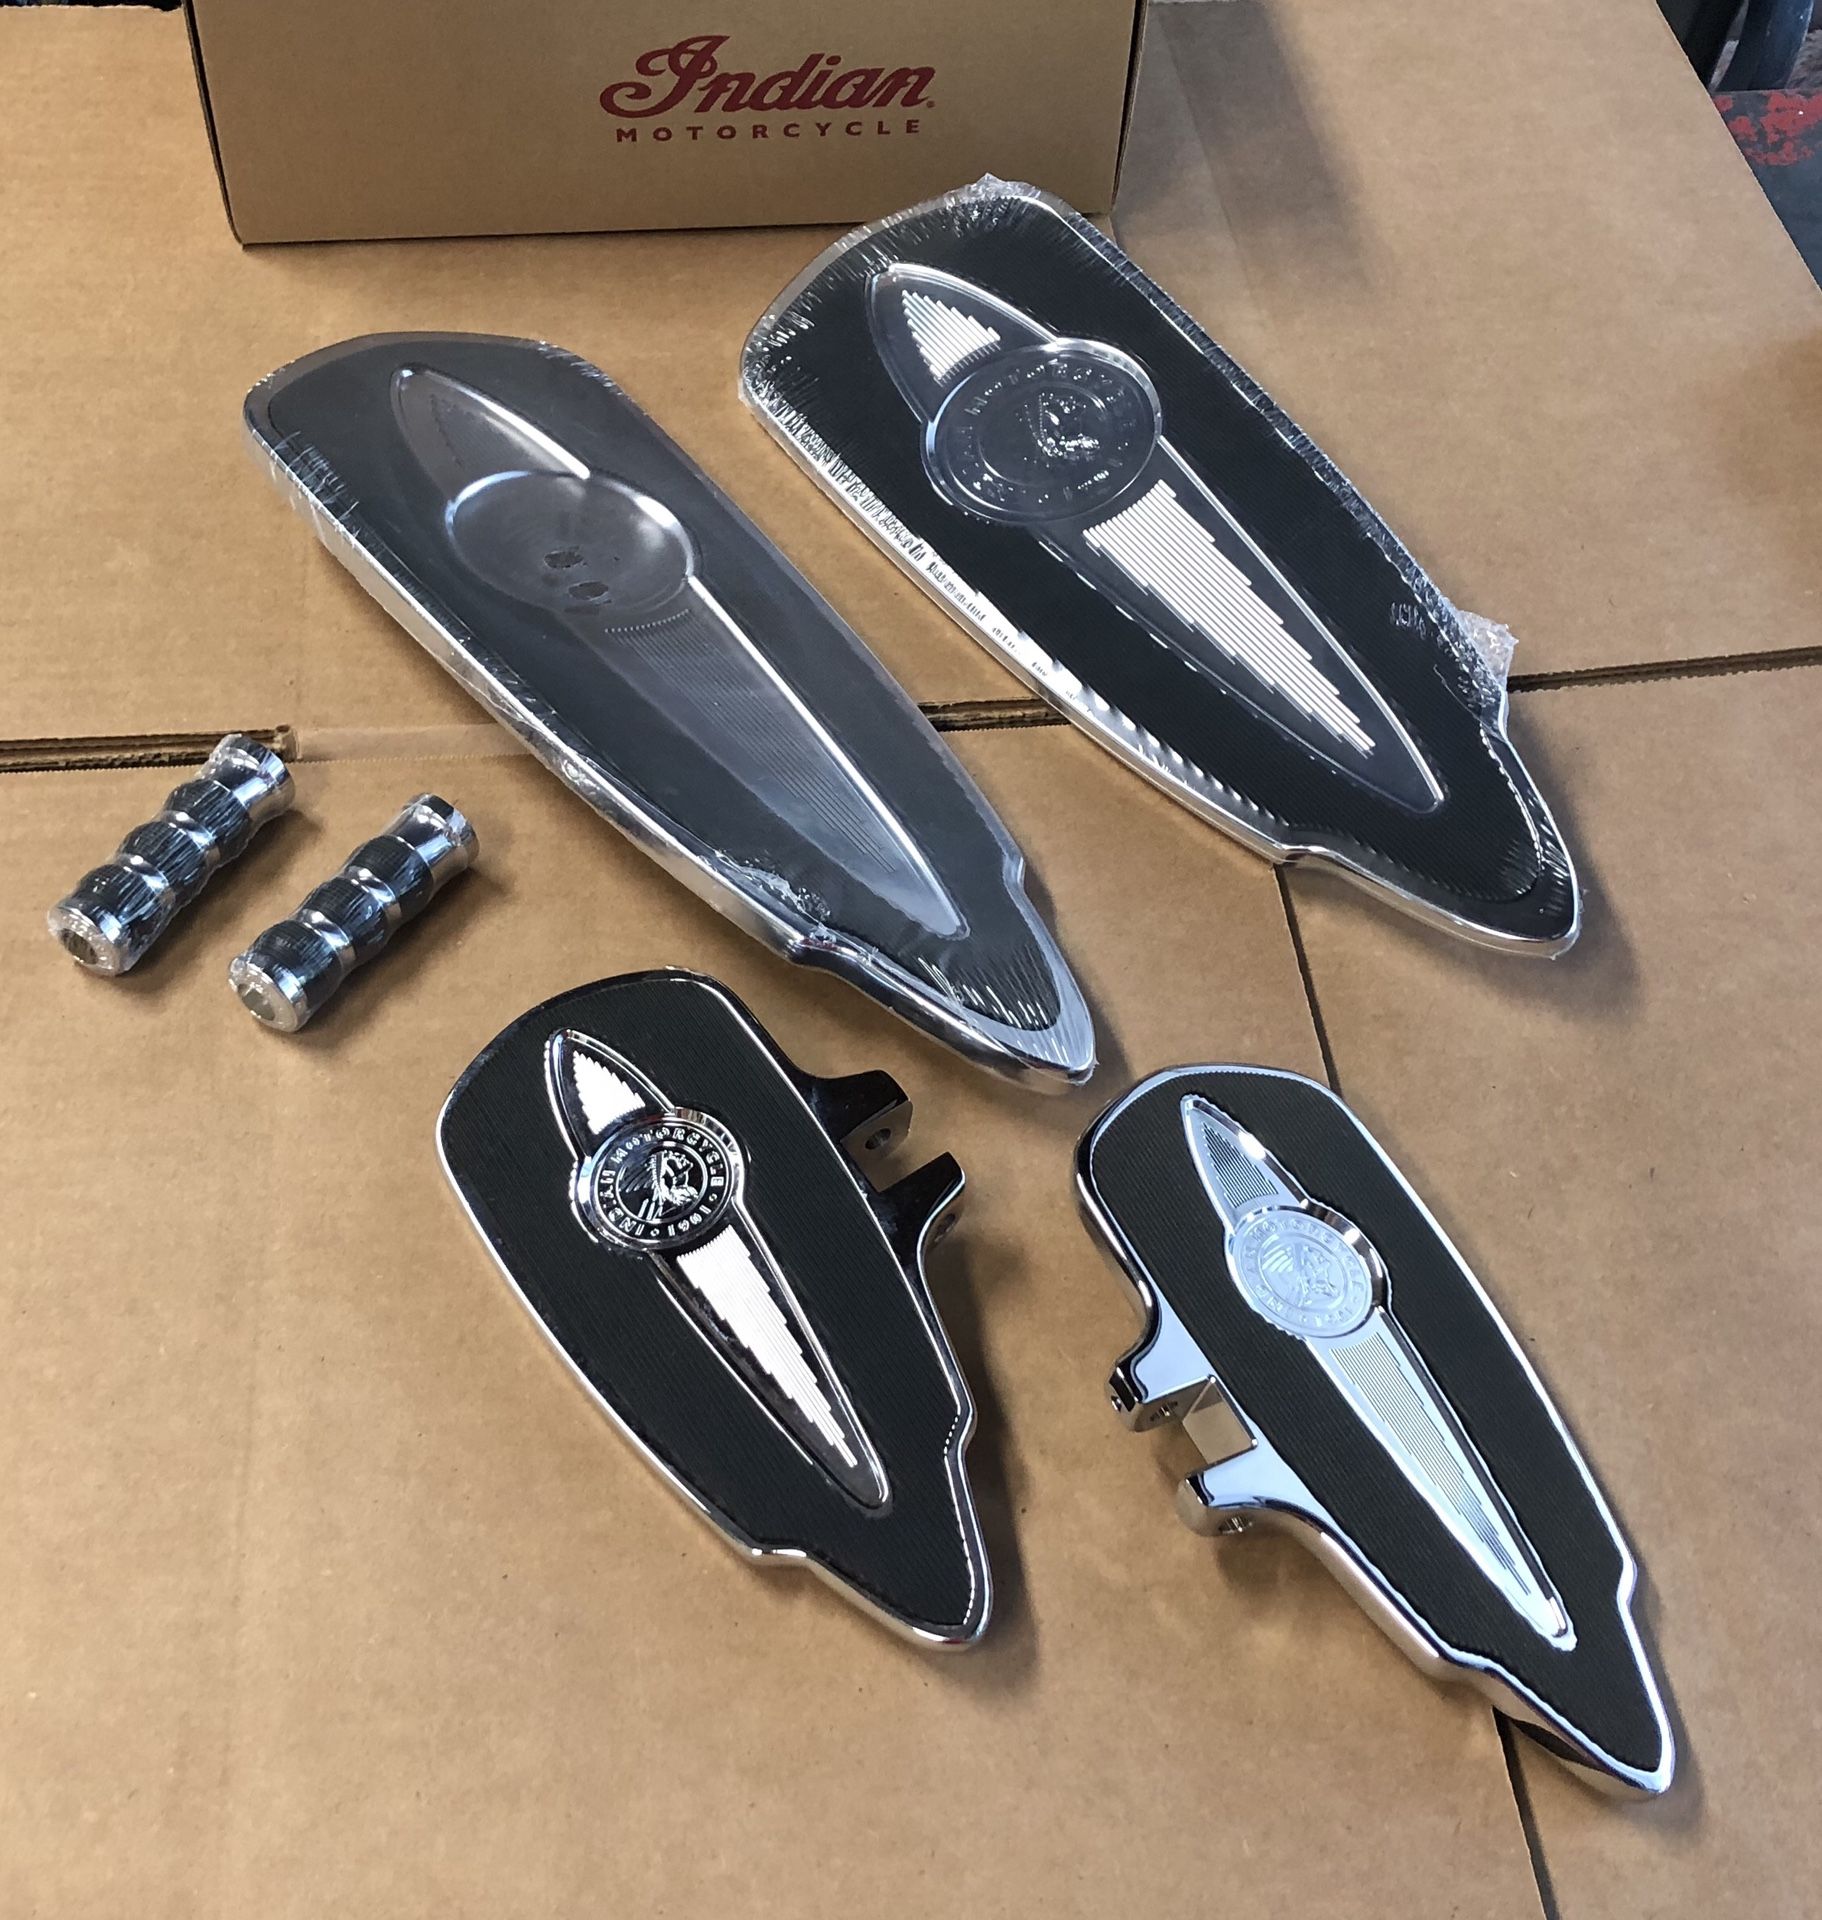 Brand New Indian Motorcycle floorboards set, includes pegs